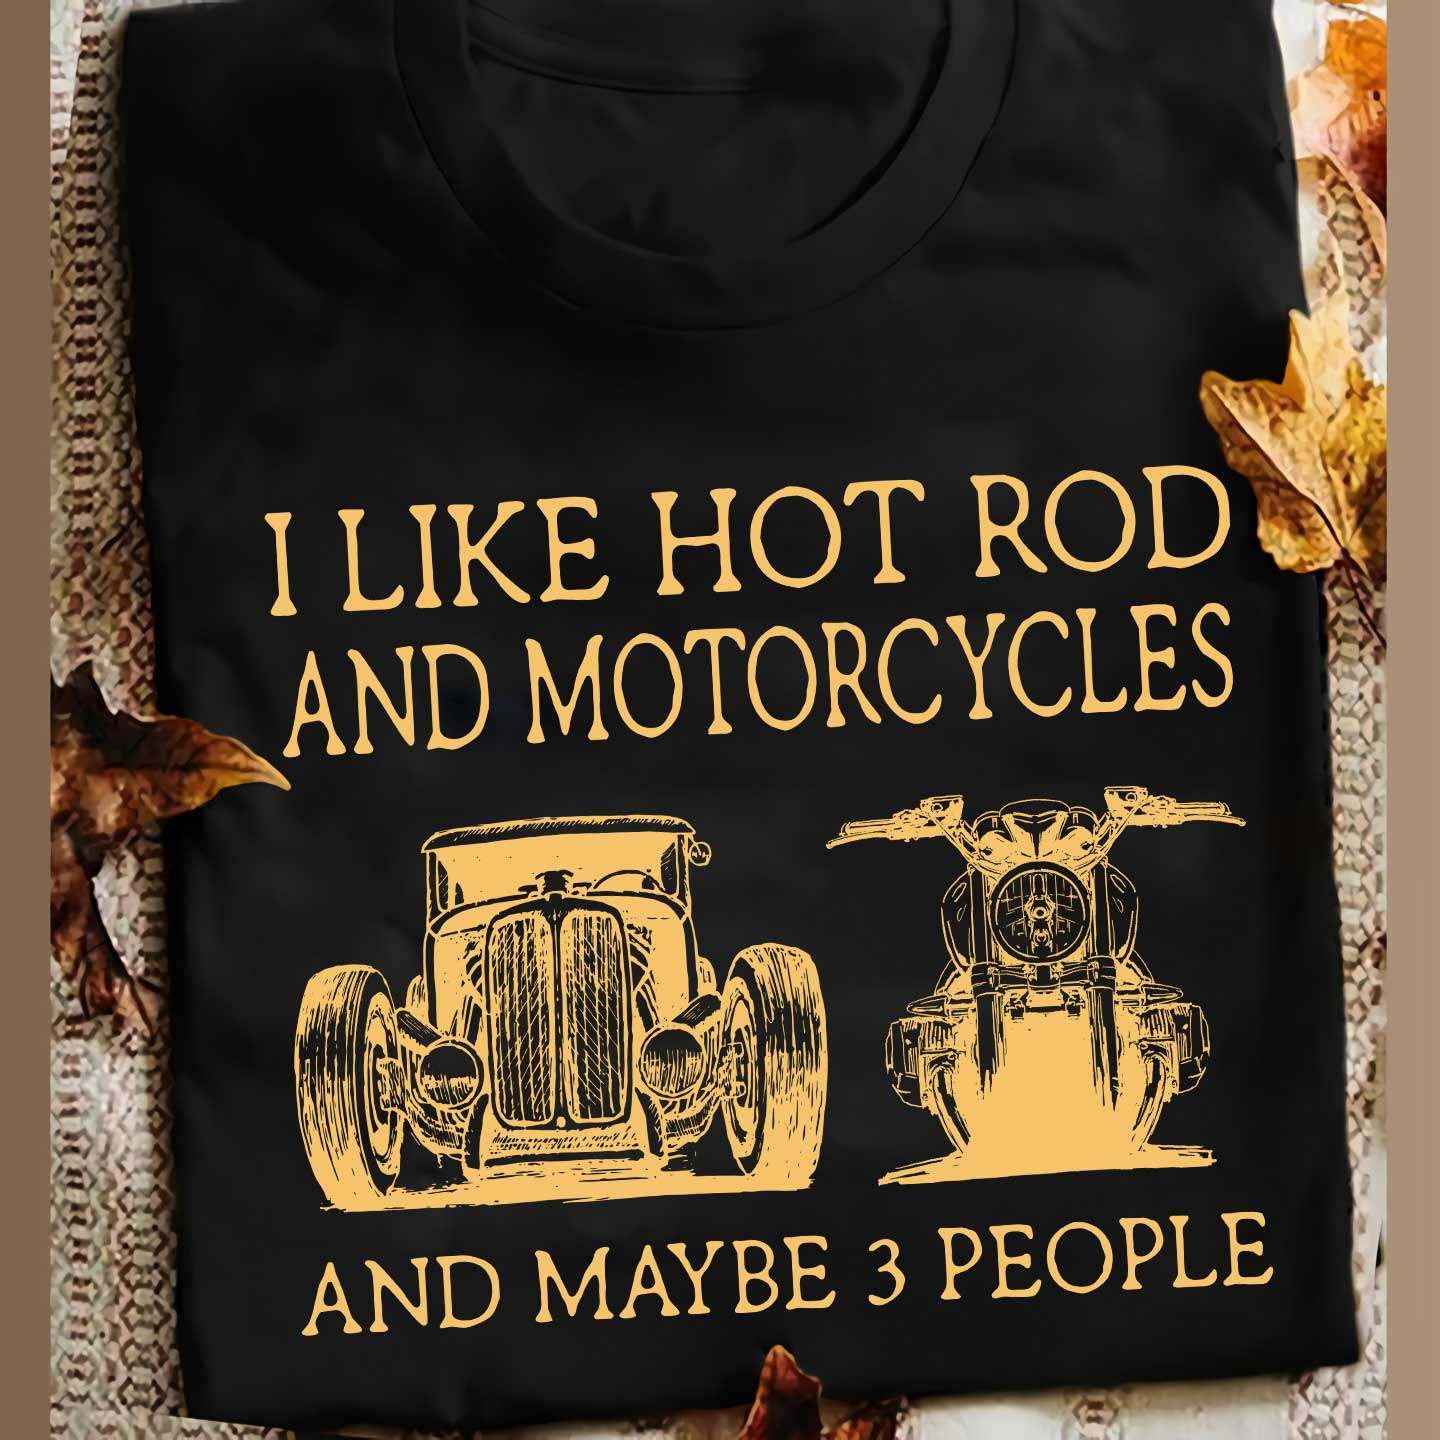 I like hot rod and motorcycles and maybe 3 people - Hot rod car